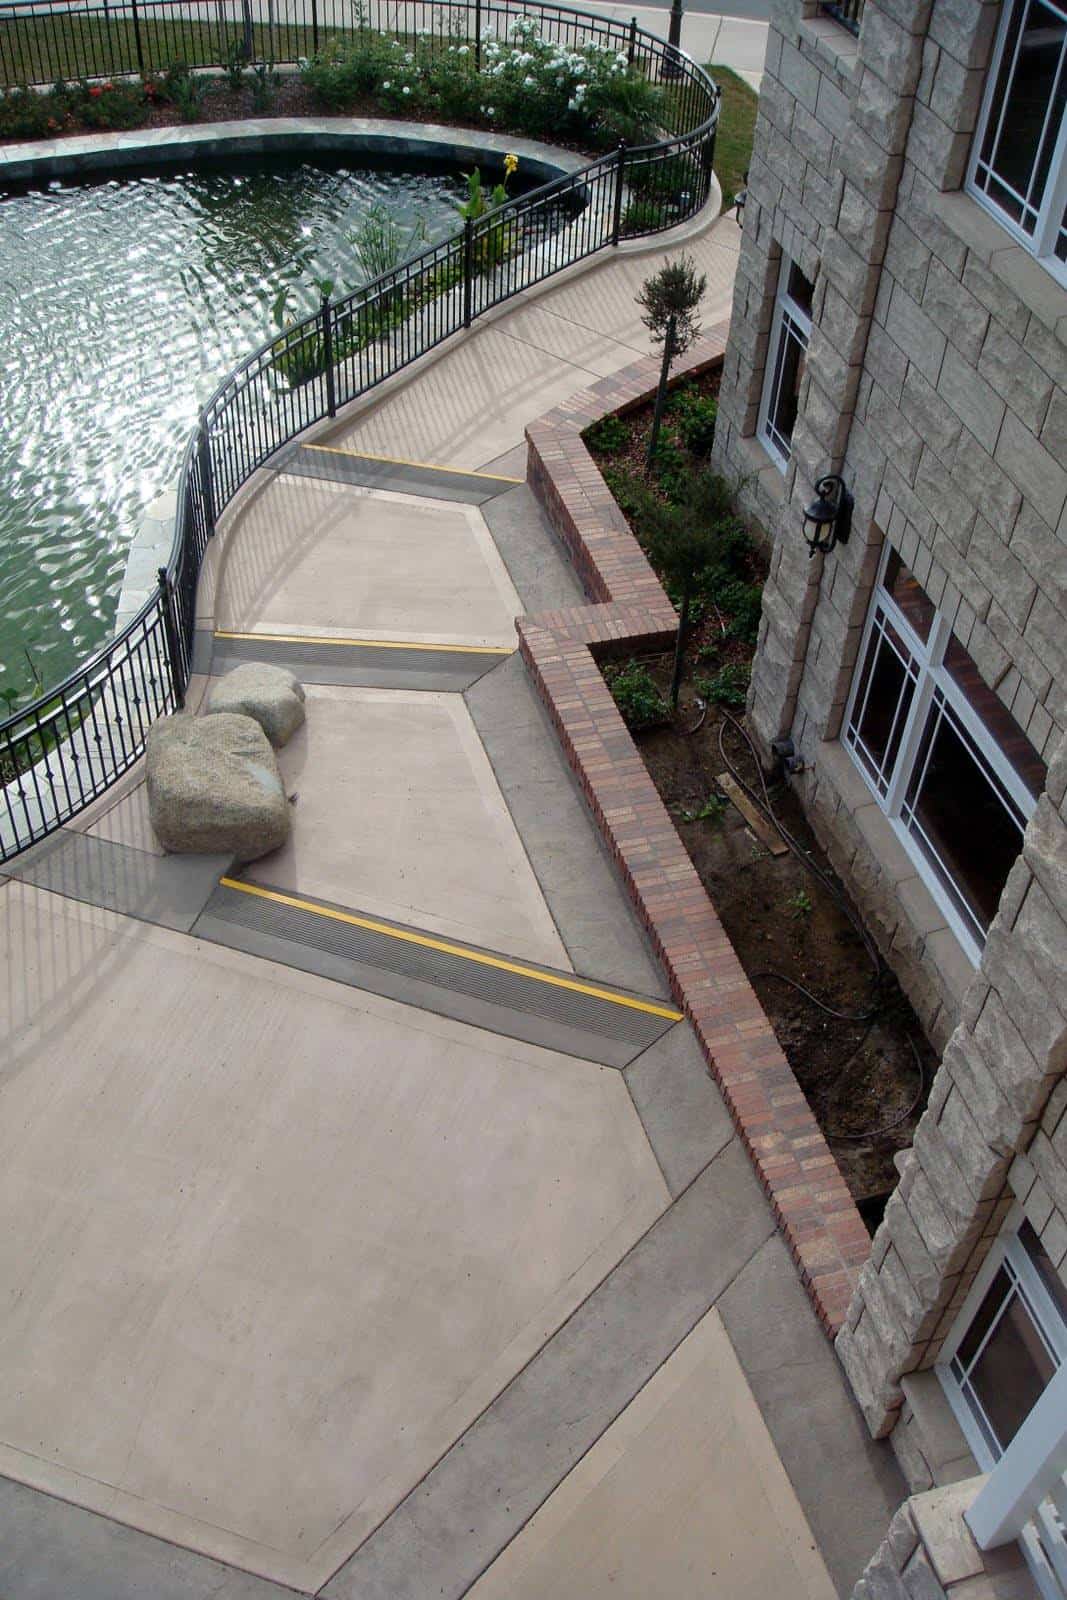 This walkway was integrally colored with Davis Colors' Padre Brown with a Walnut colored release agent and Davis Colors' Meadowbrook Brown (custom color).